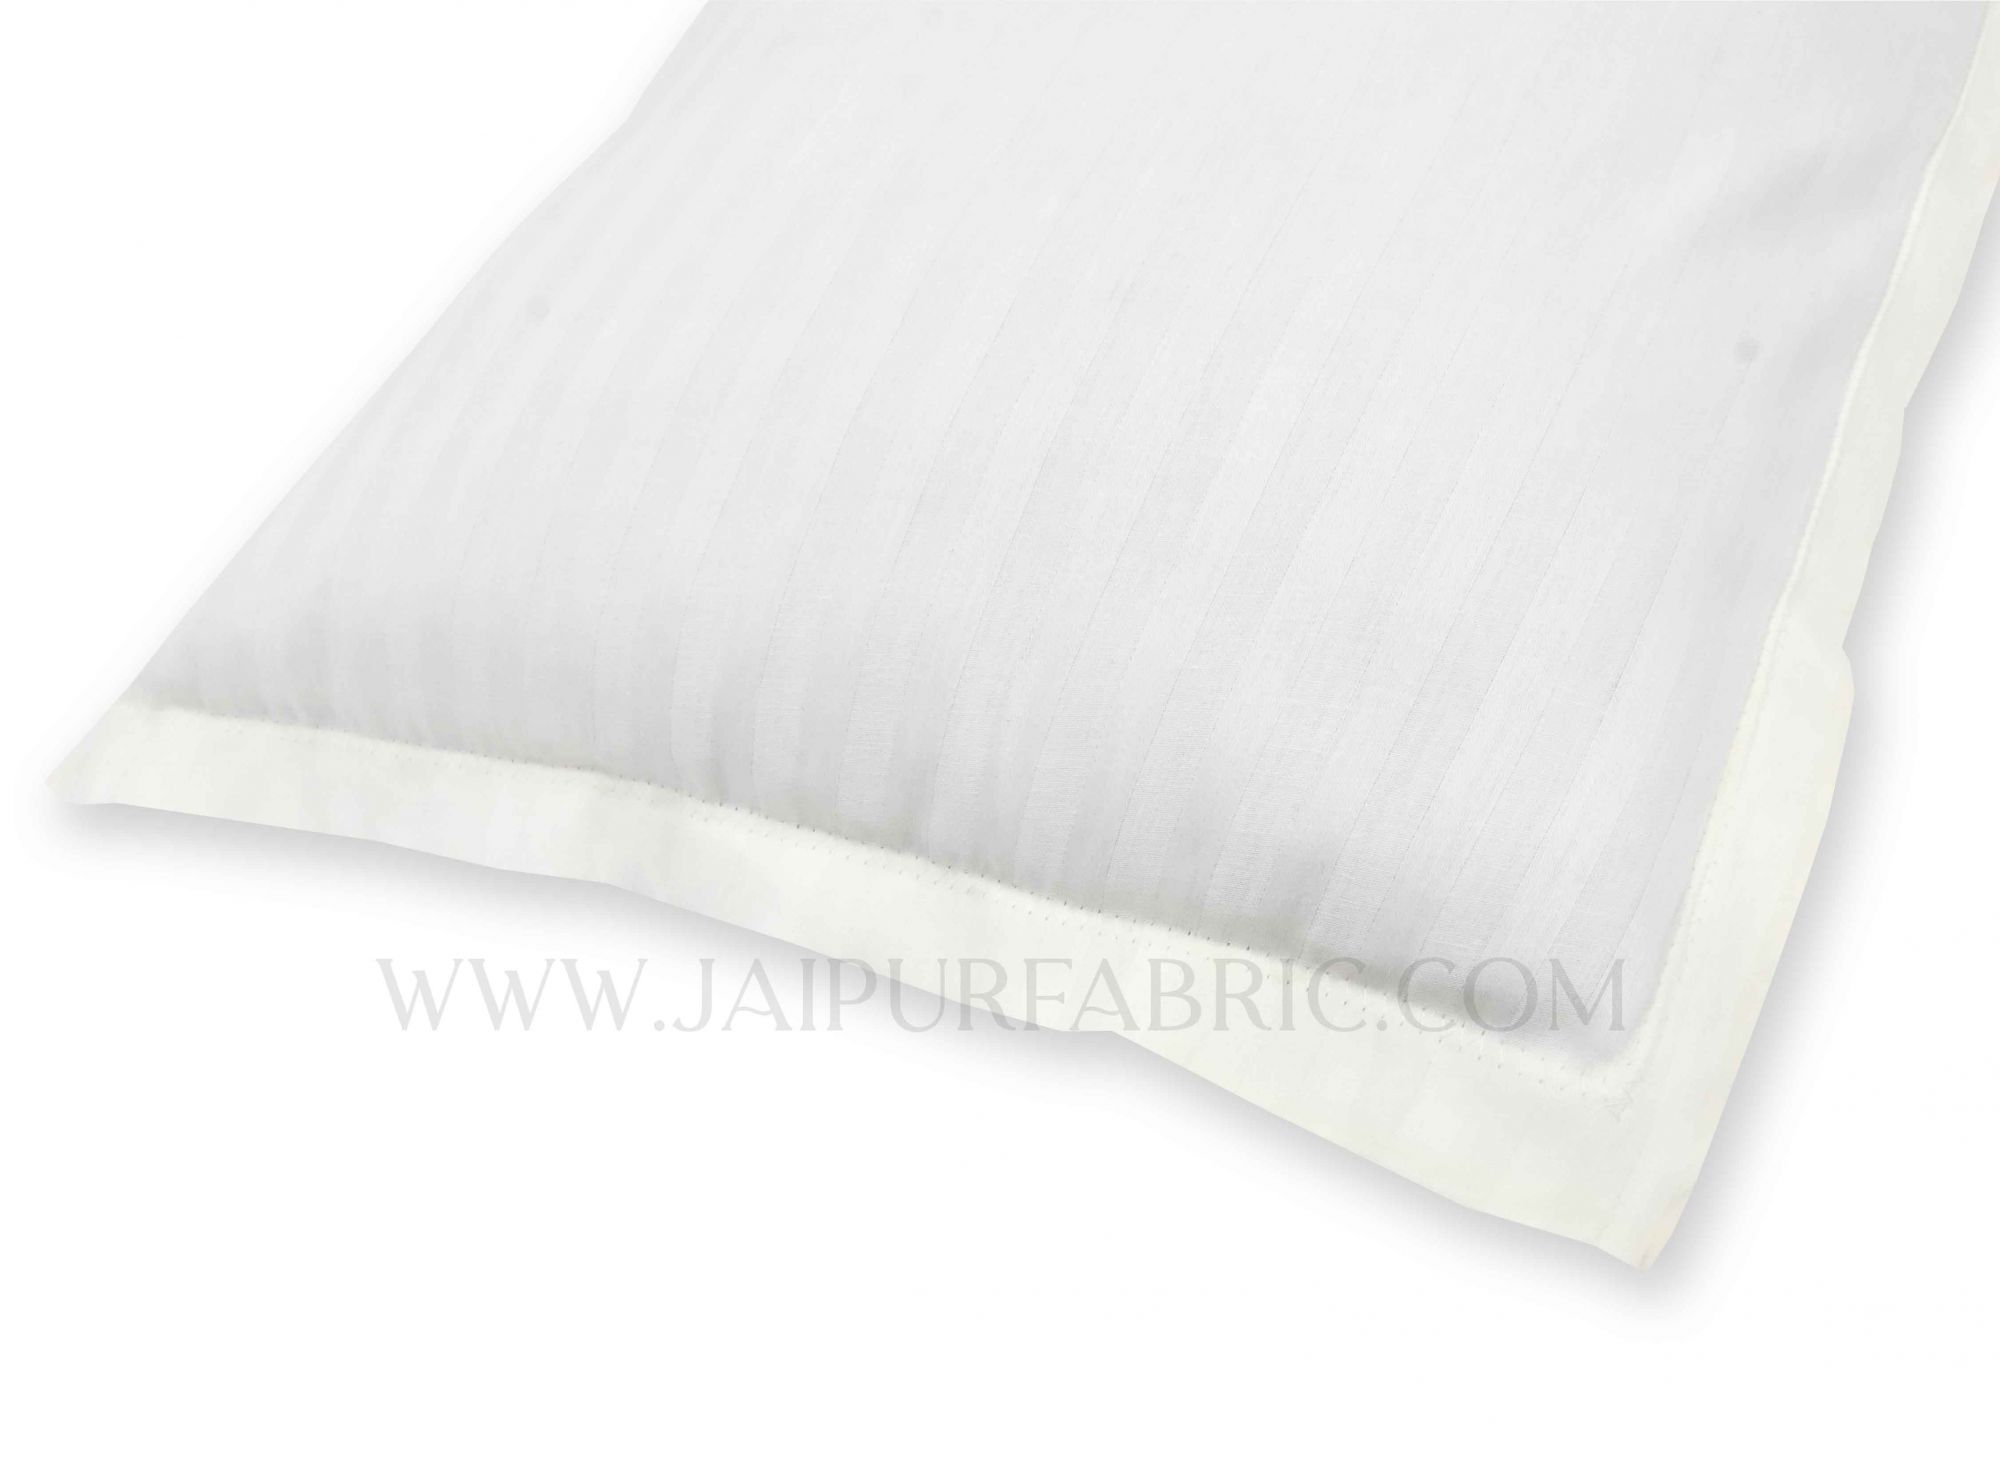 White Color Pillow Cover Pair